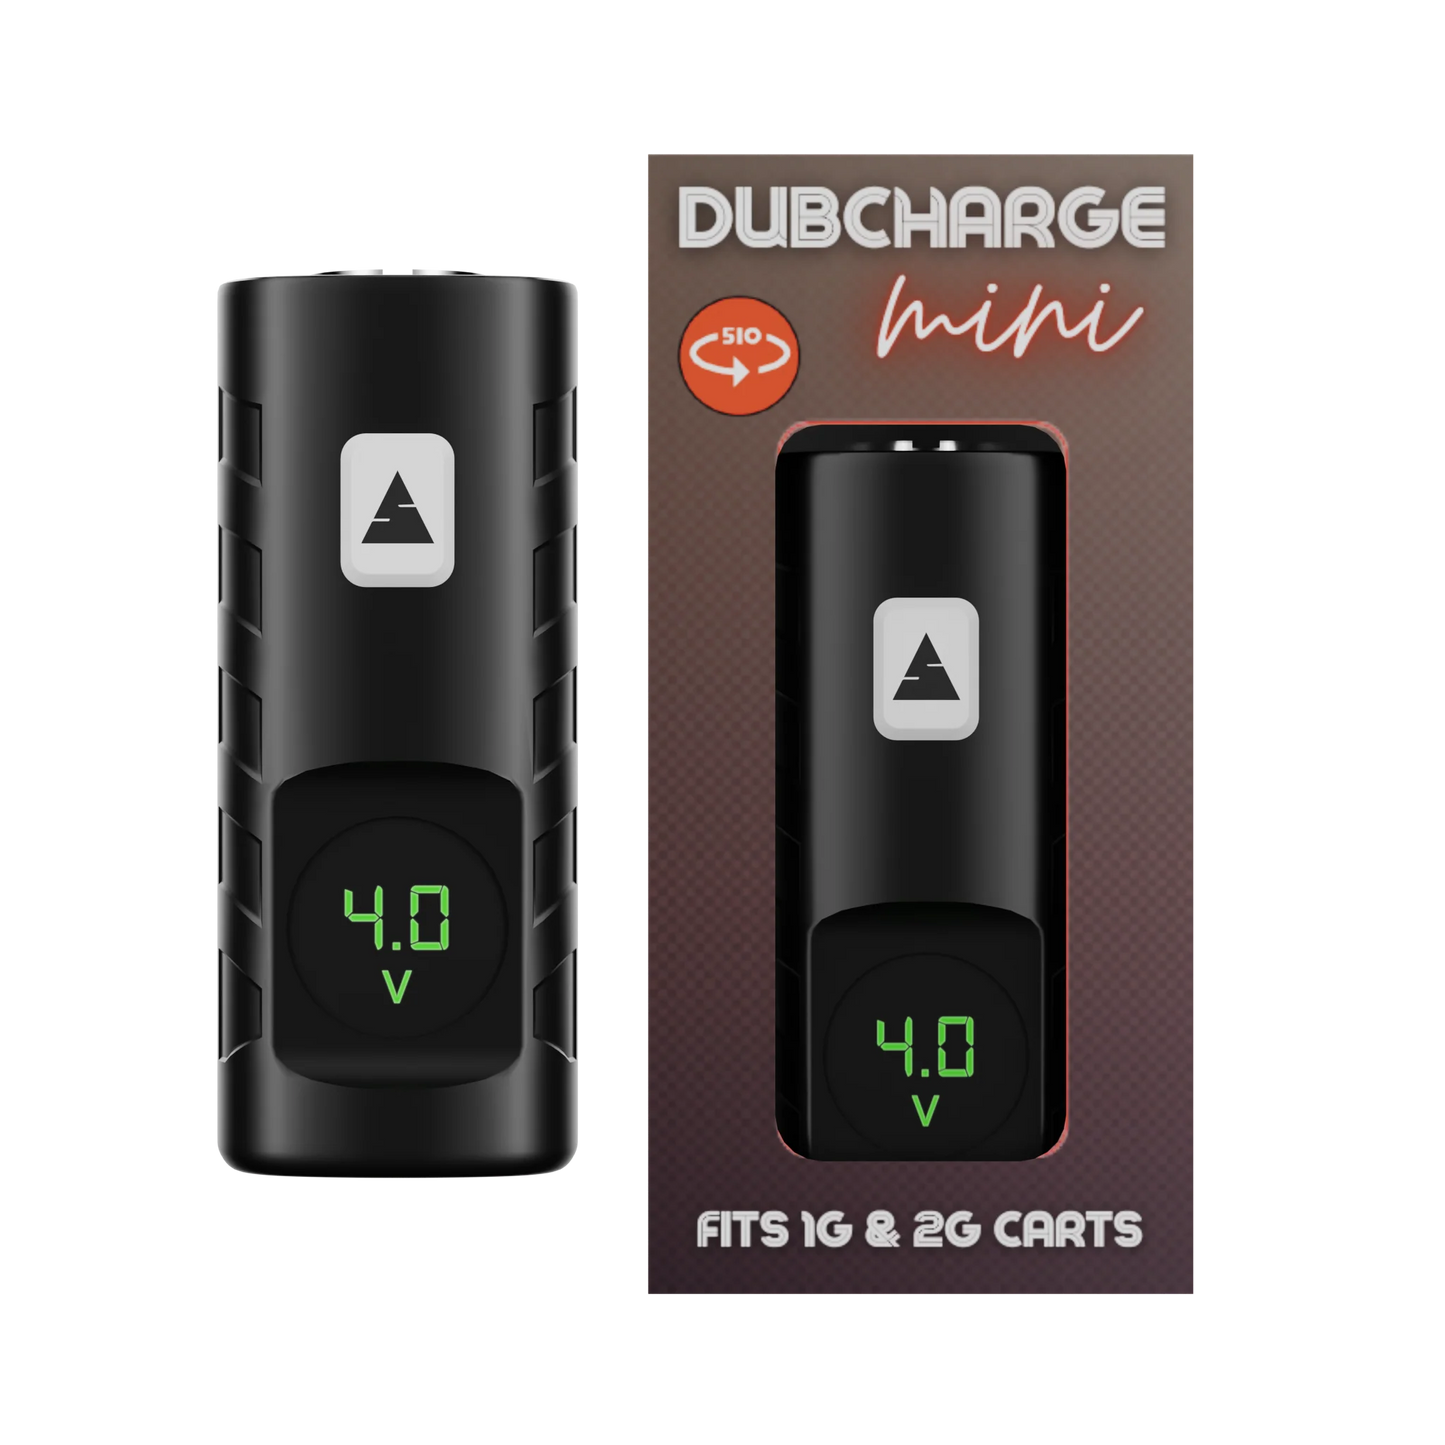 DubCharge Mini - Compact 510 Thread Battery